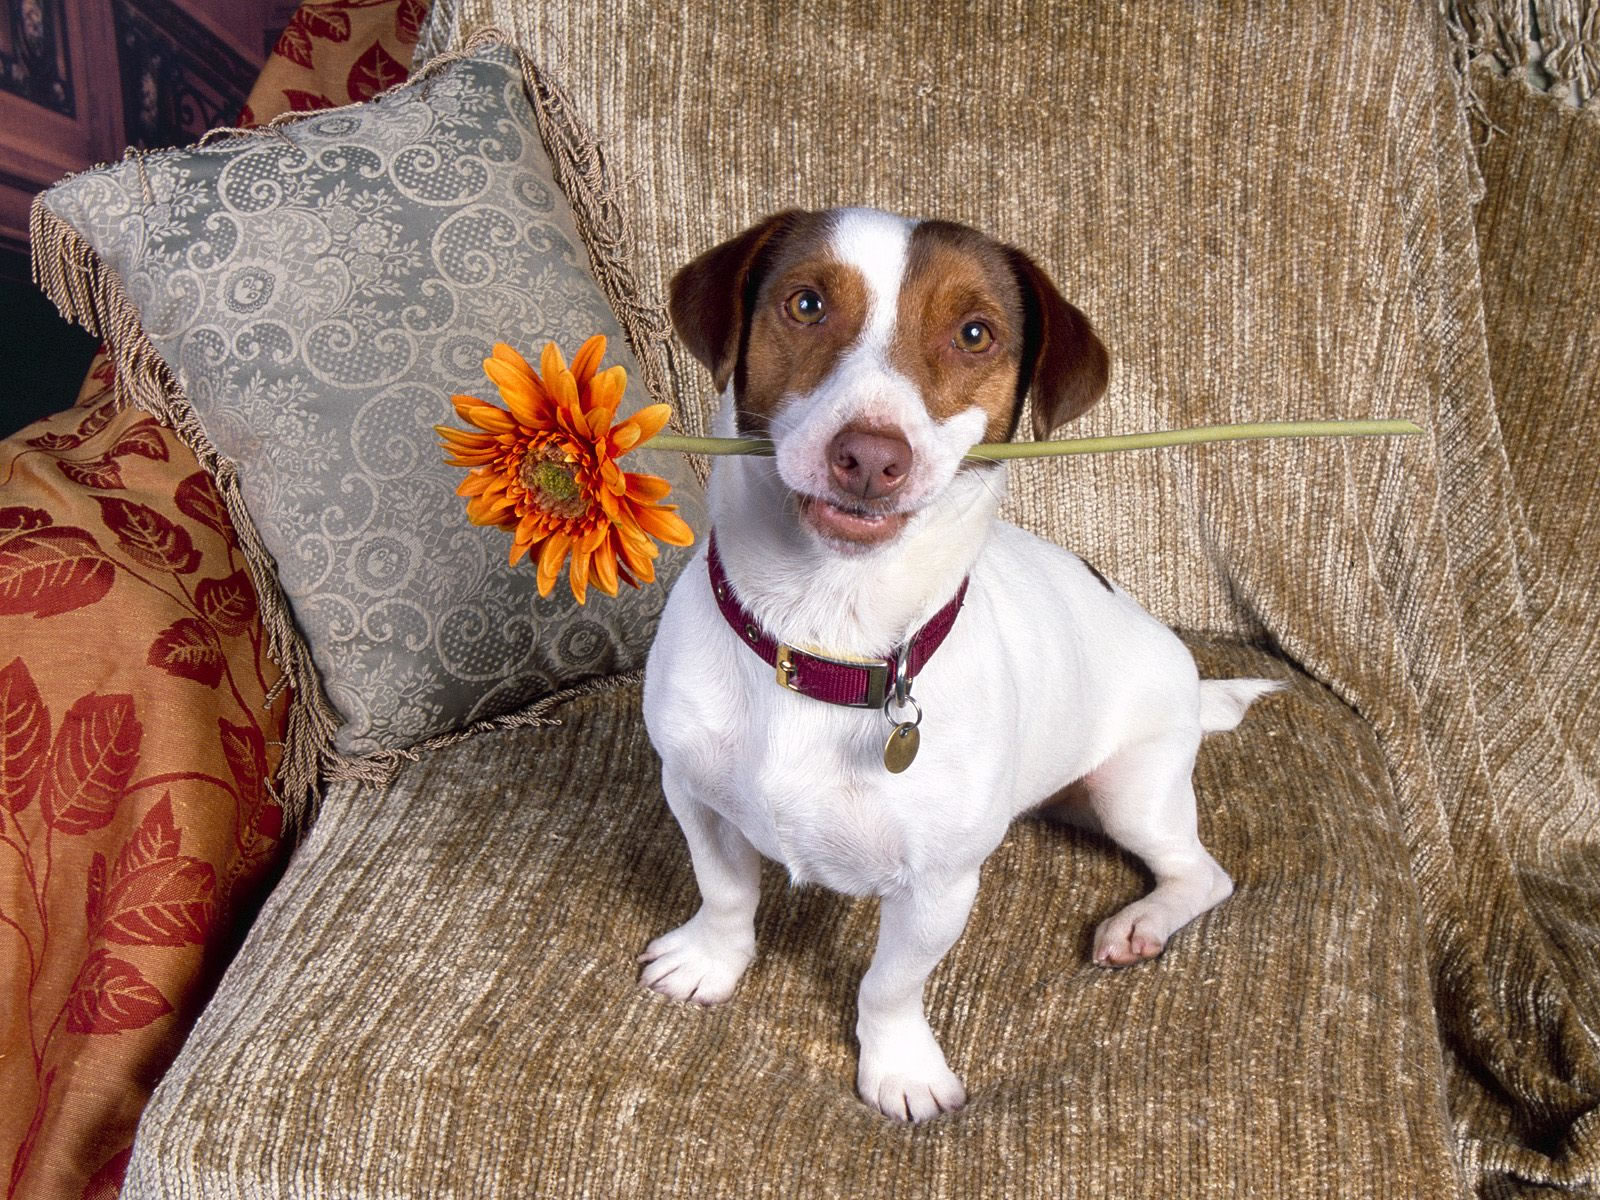 Jack Russell Terrier with a flower